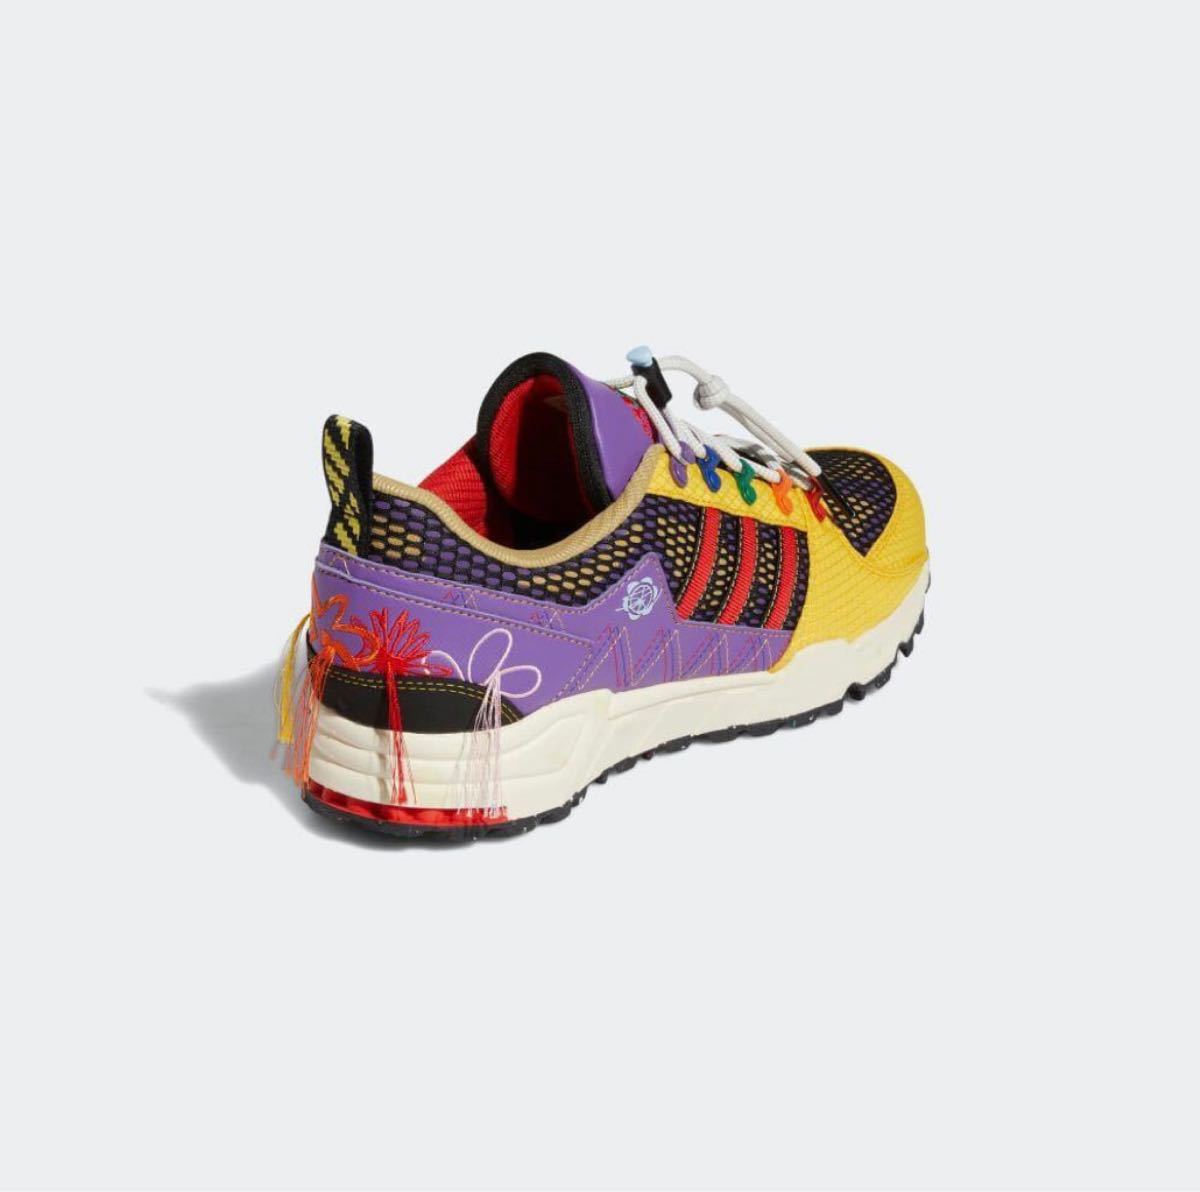 Sean Wotherspoon × adidas ショーン・ウェザースプーン × アディダス EQT Support 93